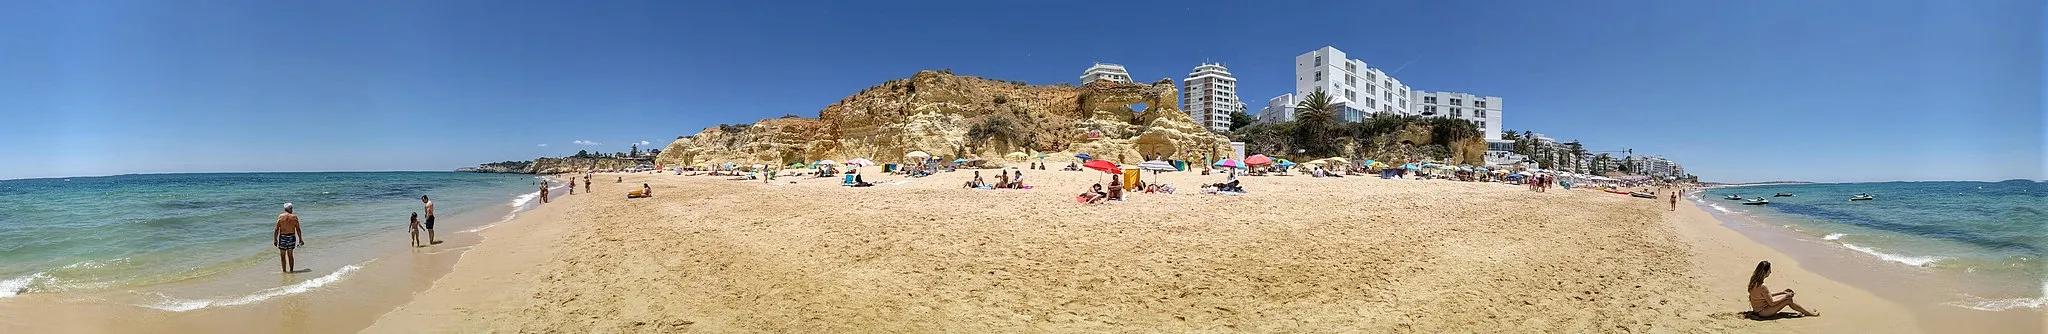 Photo showing: Panoramic view of Praia de Armação de Pêra from the surf, showing the Holiday Inn, cliffs, and more